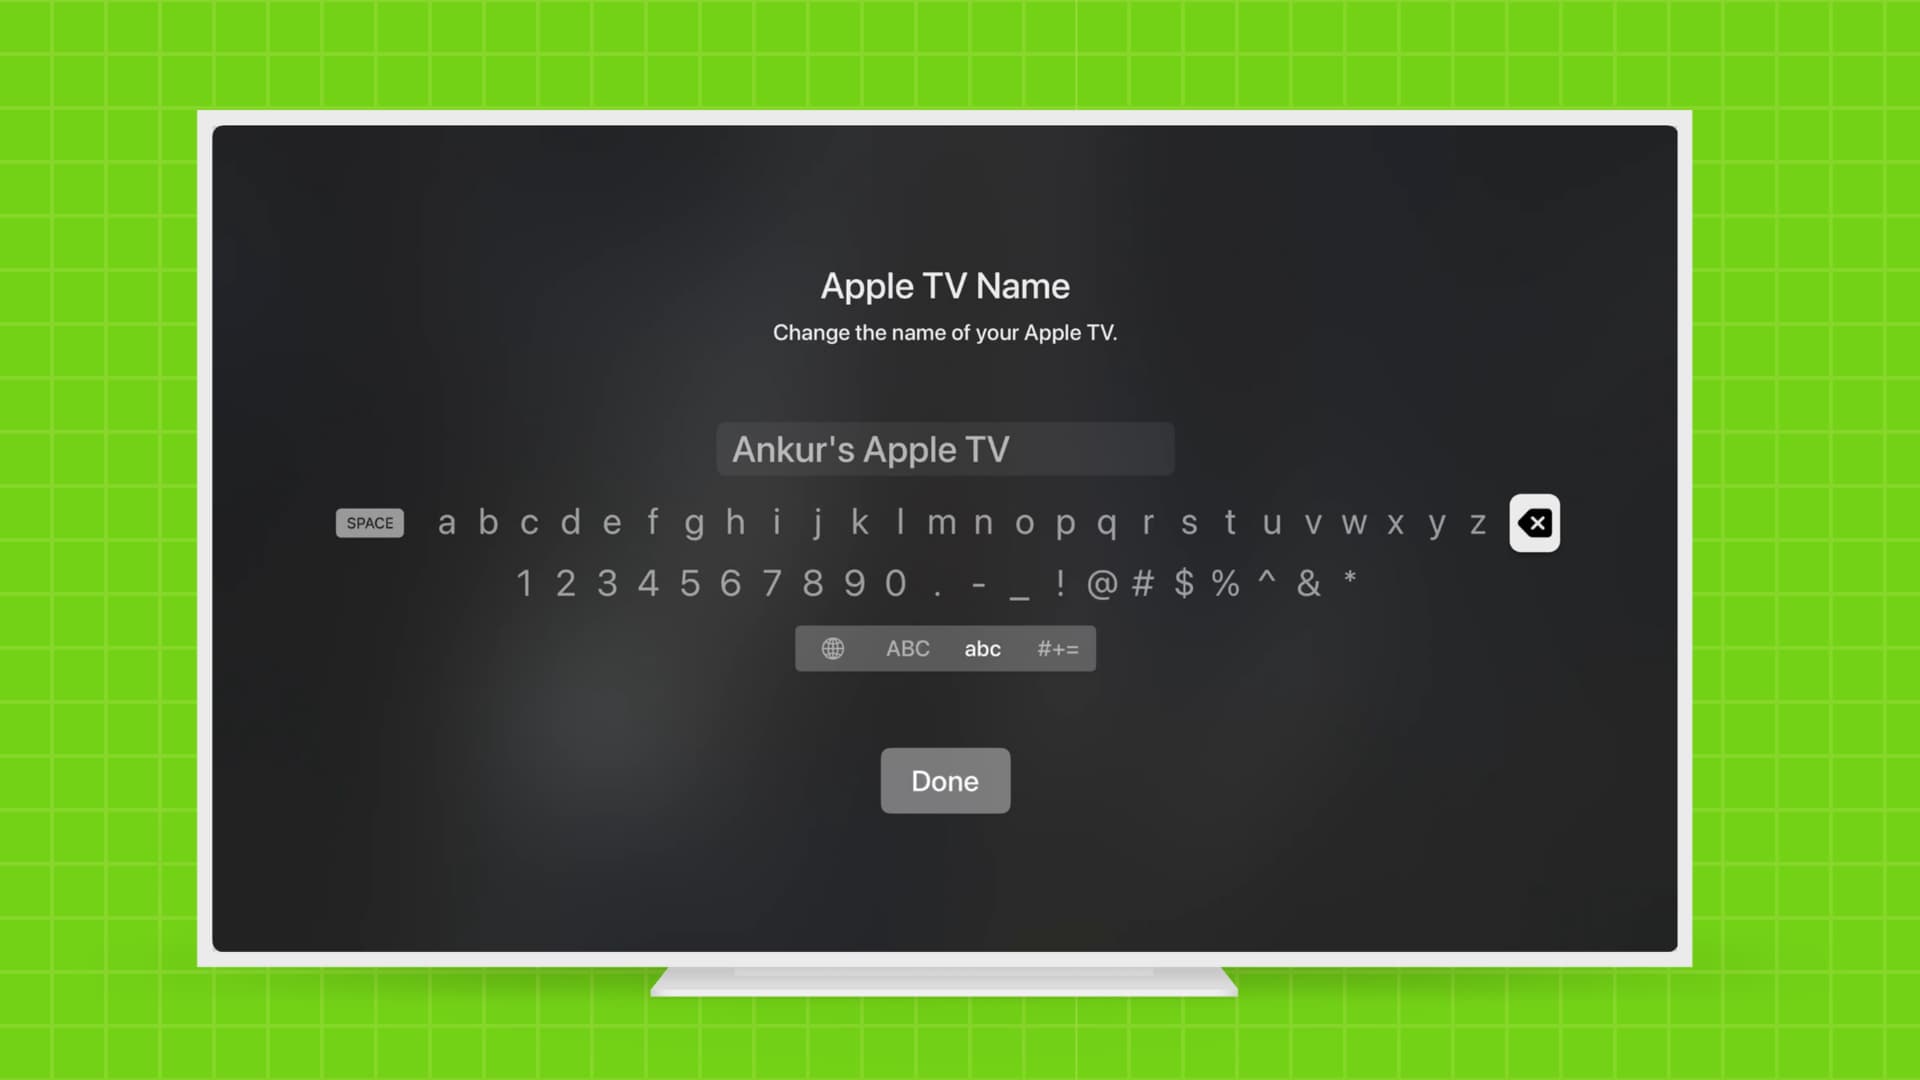 Changing the name of Apple TV